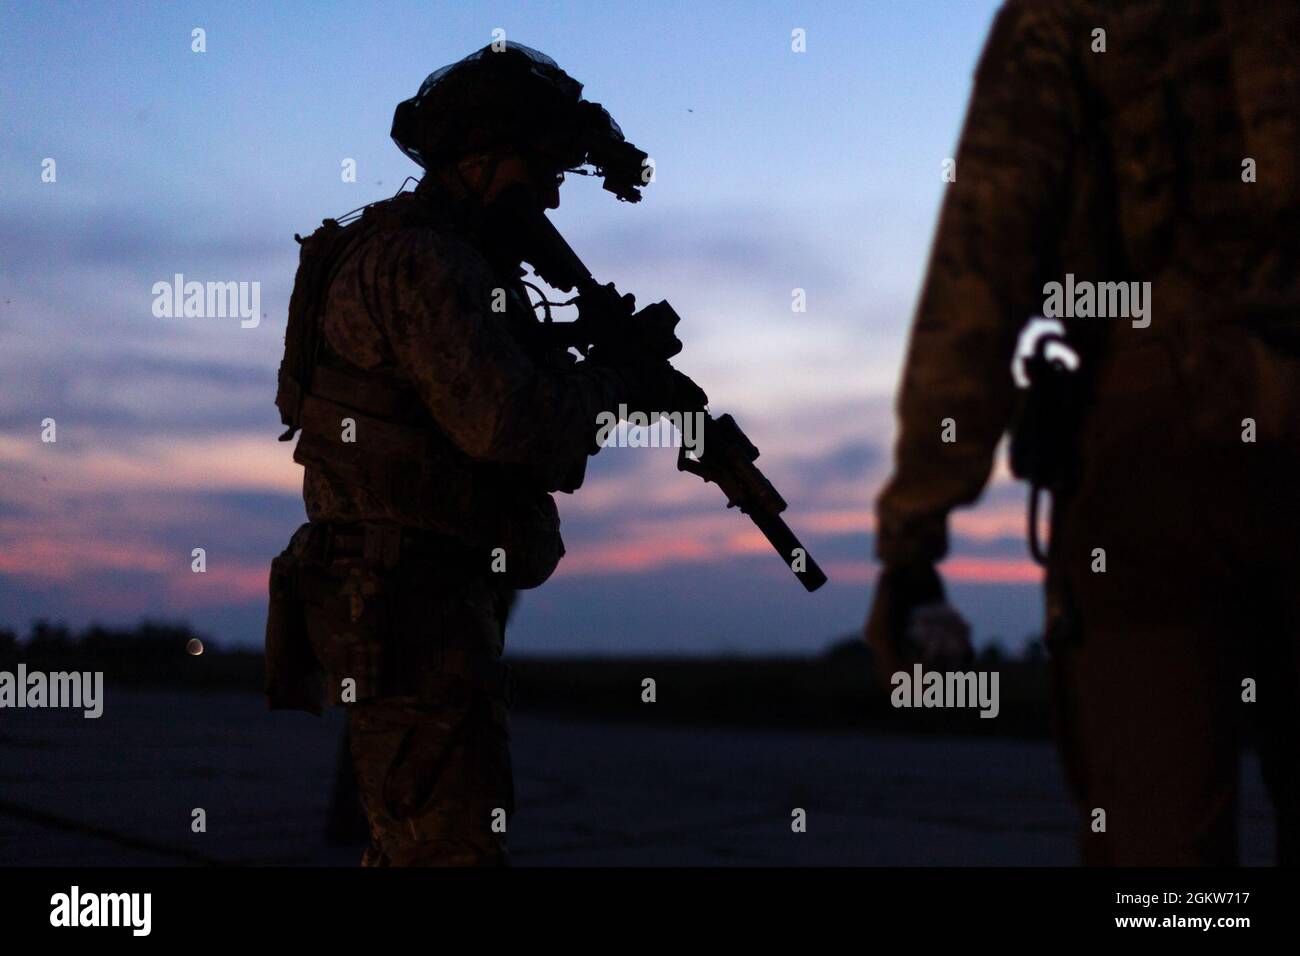 A U.S. Navy SEAL checks his weapon before a joint nighttime mission between Ukrainian Special Forces and U.S. Navy SEALs during exercise Sea Breeze 21, in Ochakiv, Ukraine, July 6 2021. Sea Breeze 21 is a U.S. and Ukraine co-hosted multinational maritime exercise held in the Black Sea designed to enhance interoperability of participating nations and strengthen maritime security within the region. Stock Photo